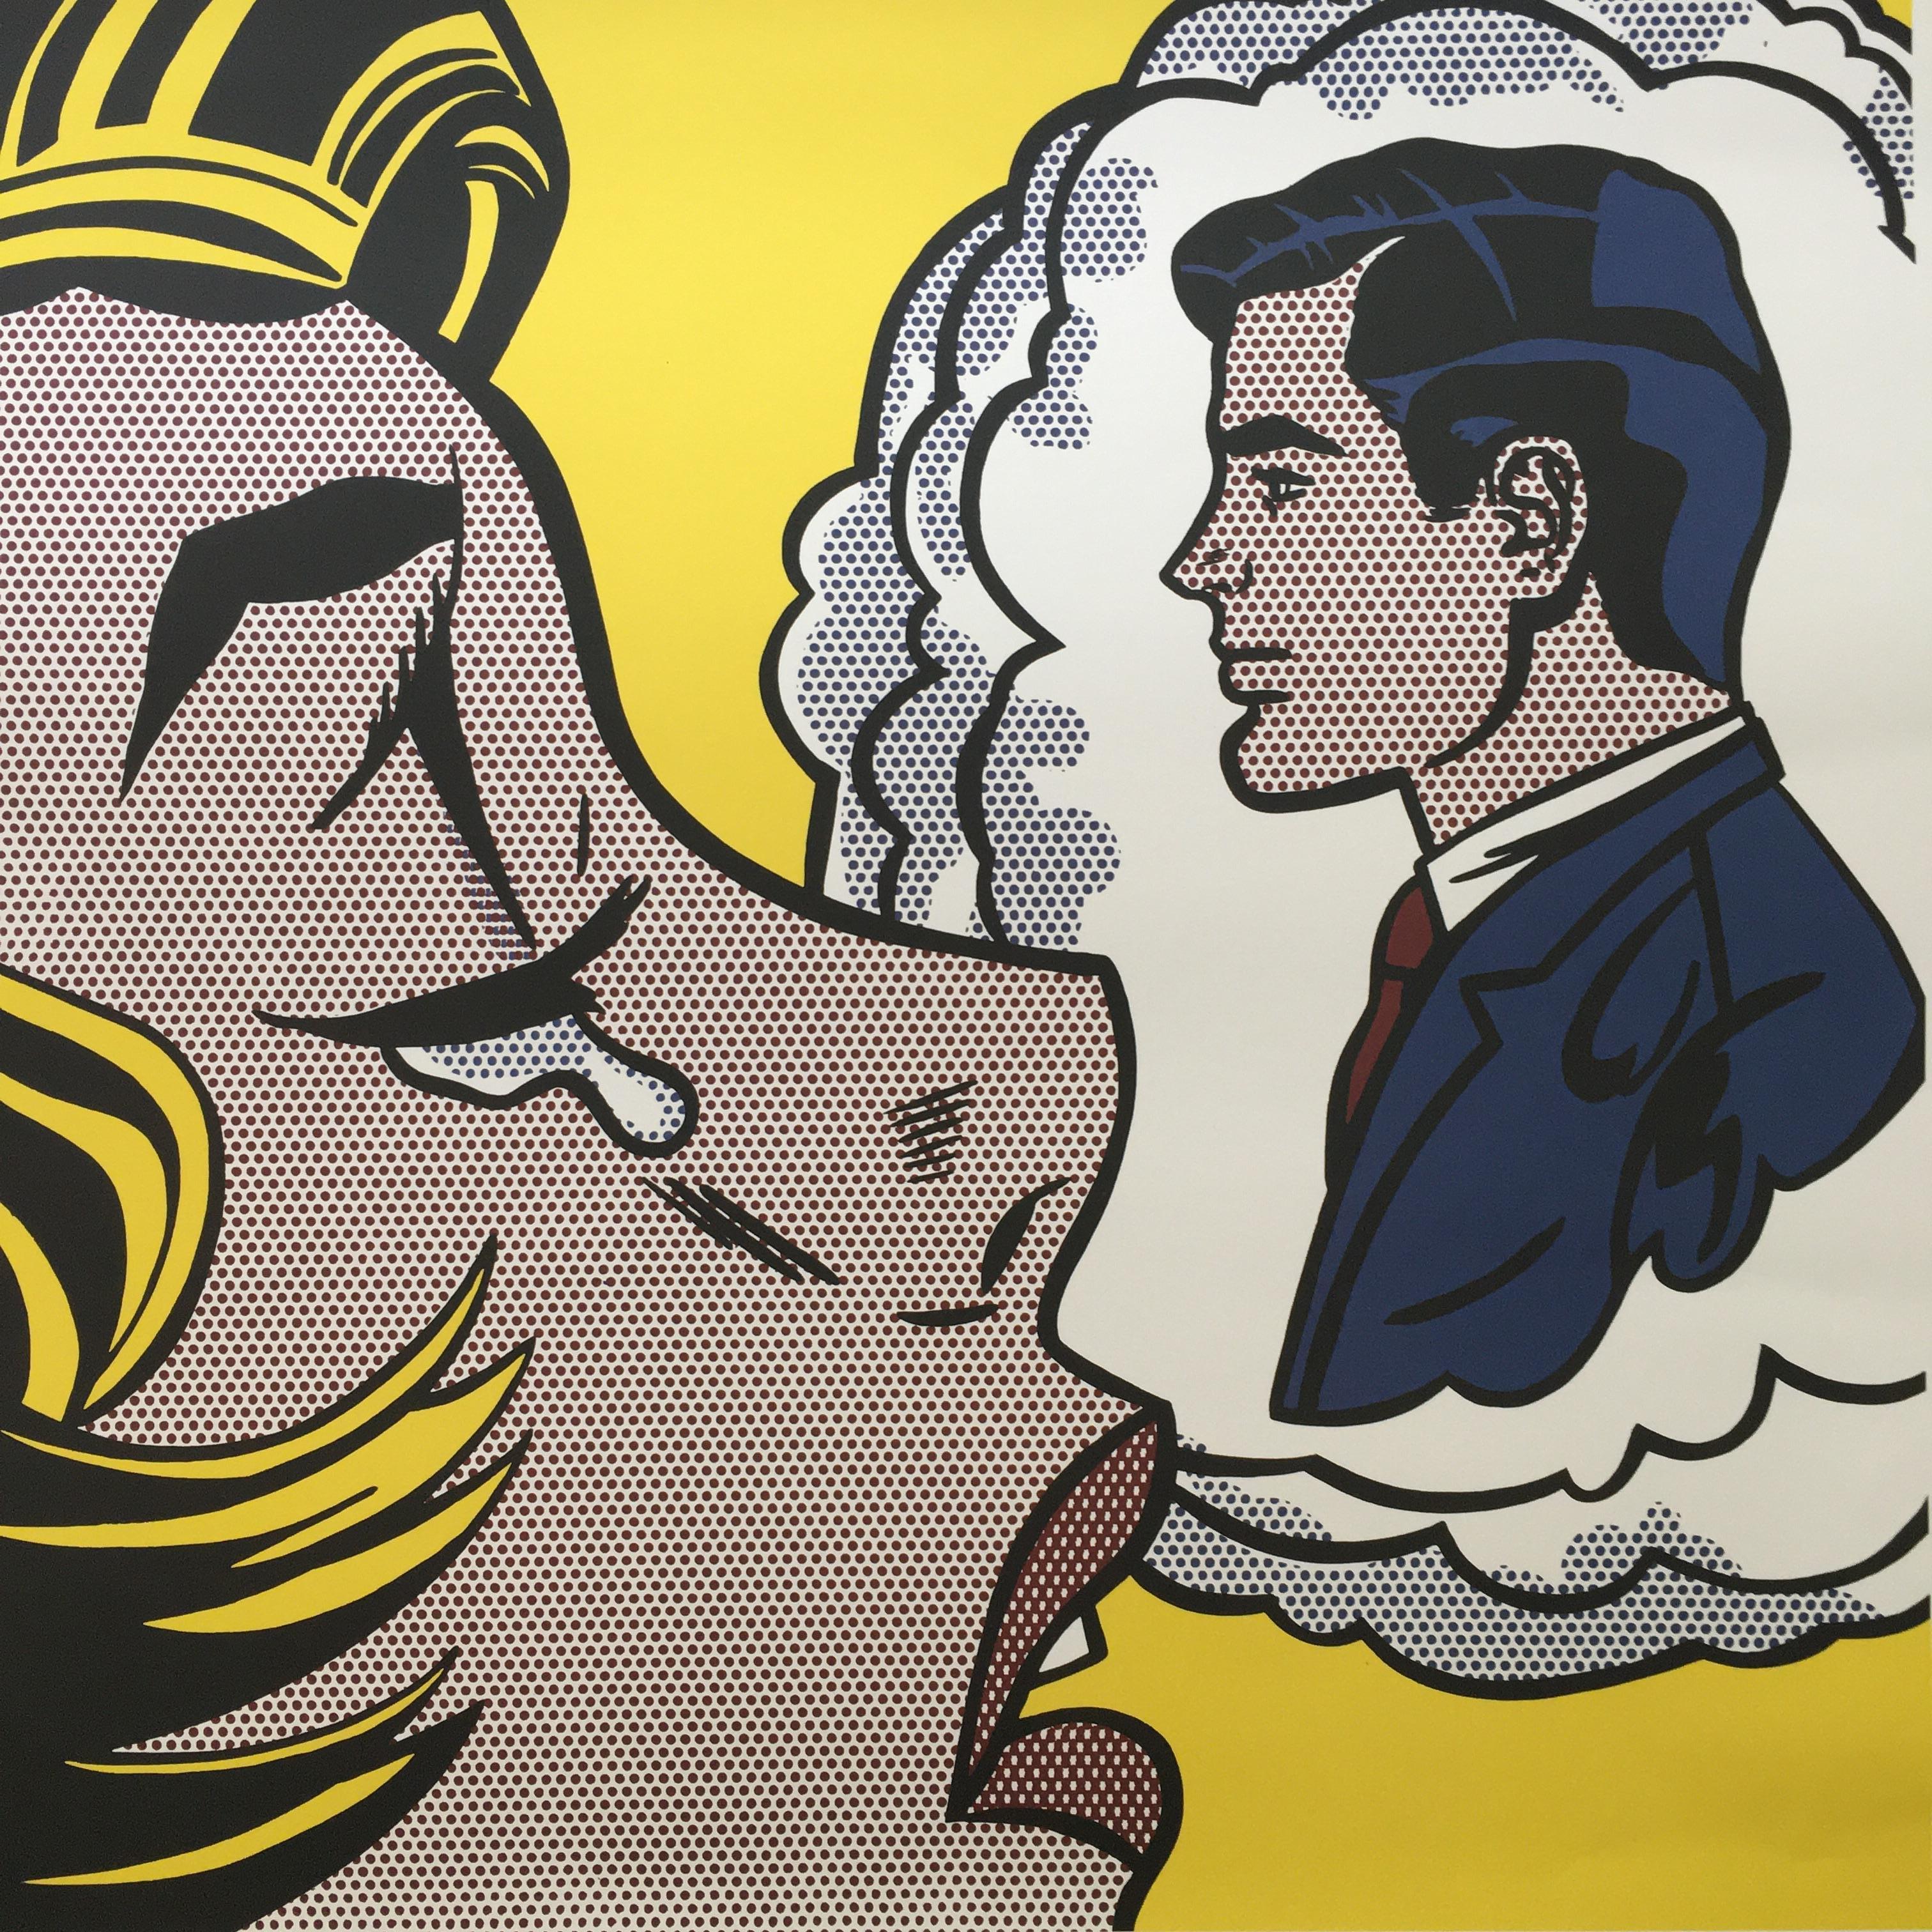 Yale University Art Gallery (Thinking of Him), Signed Poster - Print by Roy Lichtenstein